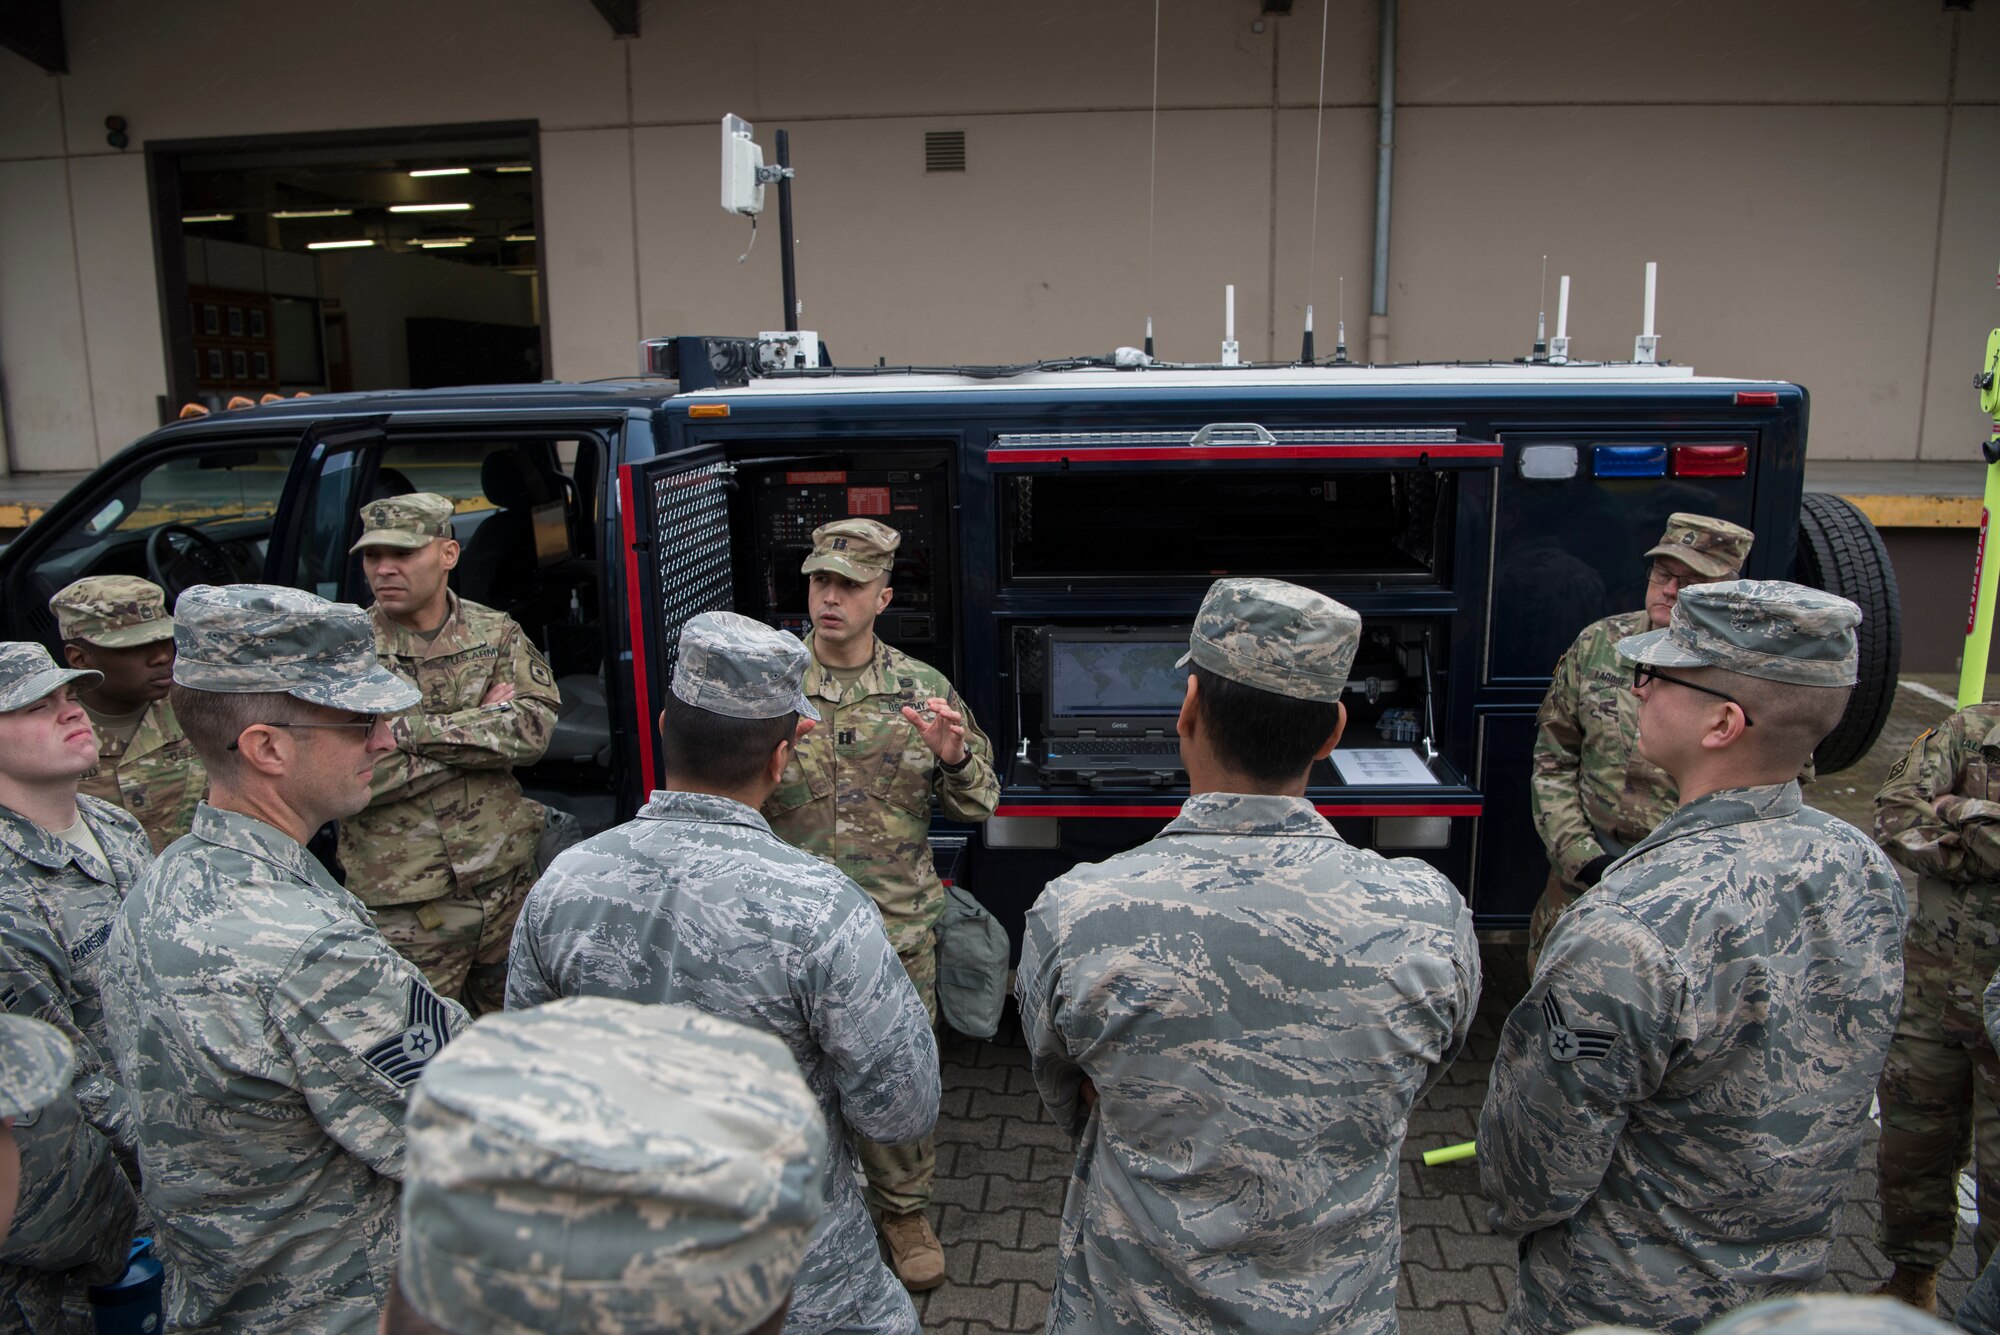 U.S. Army Capt. Dino De La Hoya, 773rd Civil Support Team operations officer in charge, explains to Airmen and Army Reserve personnel the function of the Advanced Echelon Vehicle during the 786th Civil Engineer Squadron and 773rd Civil Support Team interoperability demonstration on Ramstein Air Base, Germany, March 12, 2018. This vehicle offers quick reaction communication capability allowing commanders to disseminate assessment of an incident scene, advise a response, and facilitate access to Department of Defense information in support of the First Responder Incident Commander.